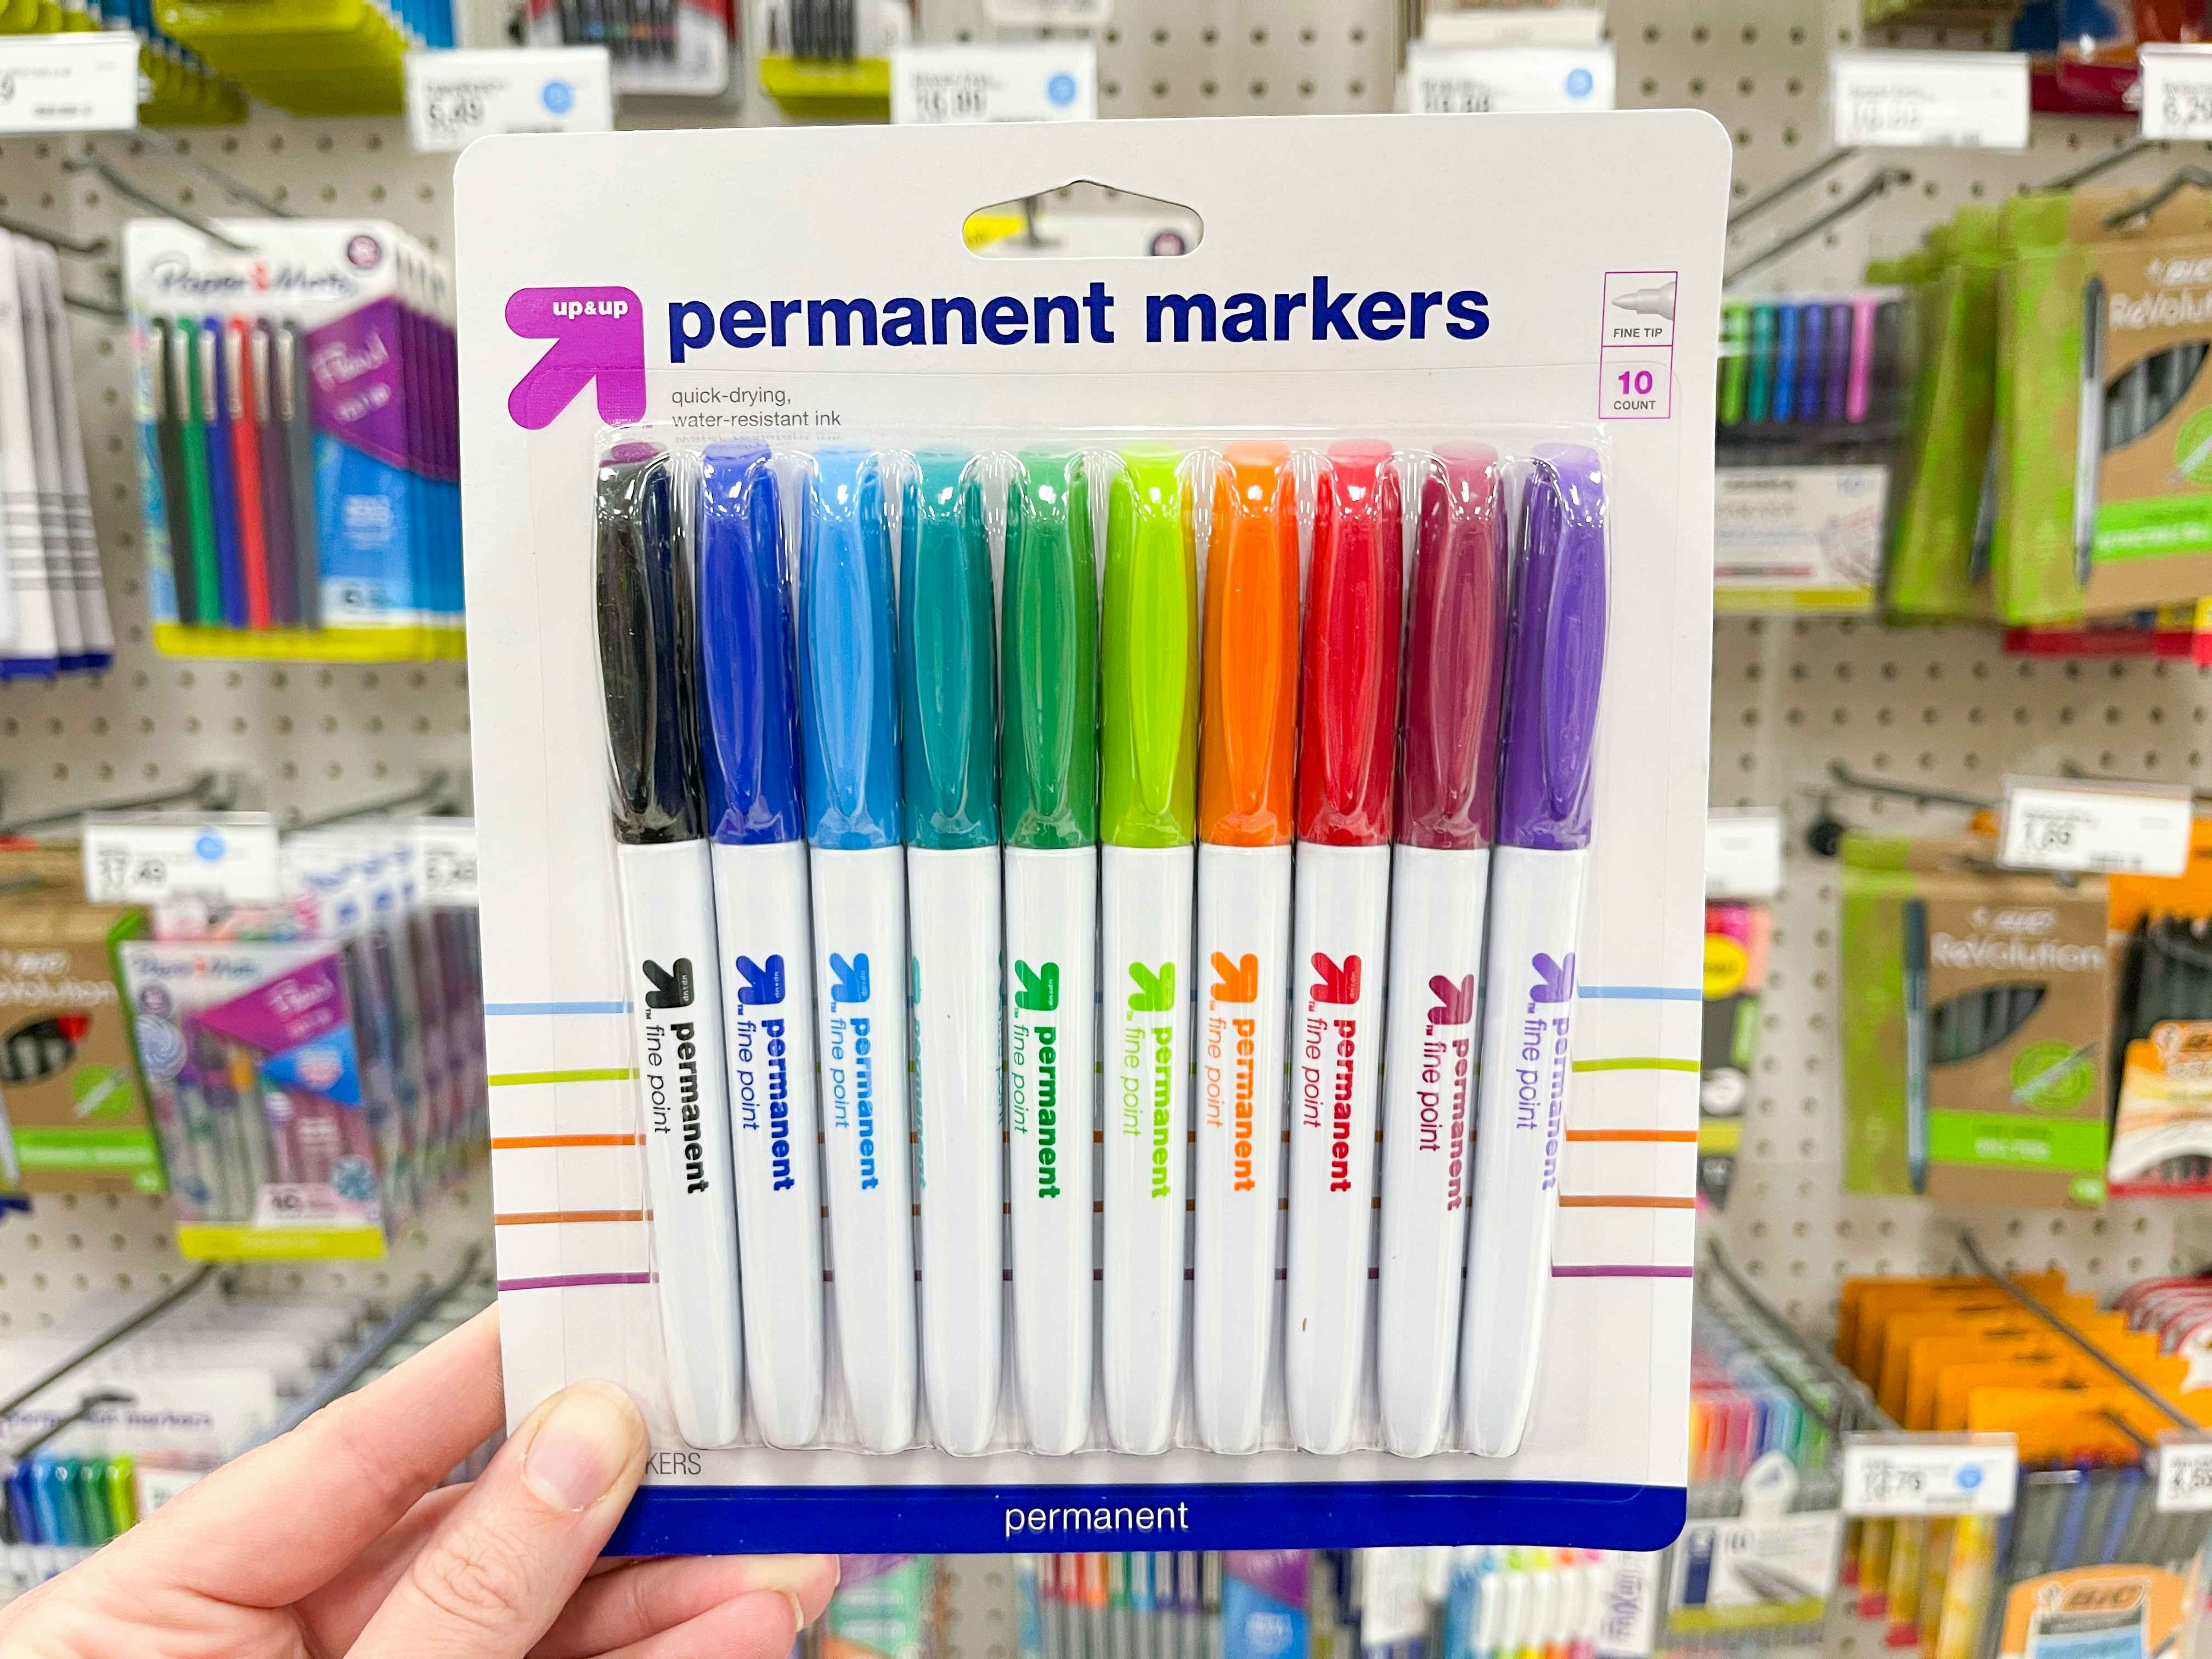 A person's hand holding up some Up&Up Permanent markers at Target.